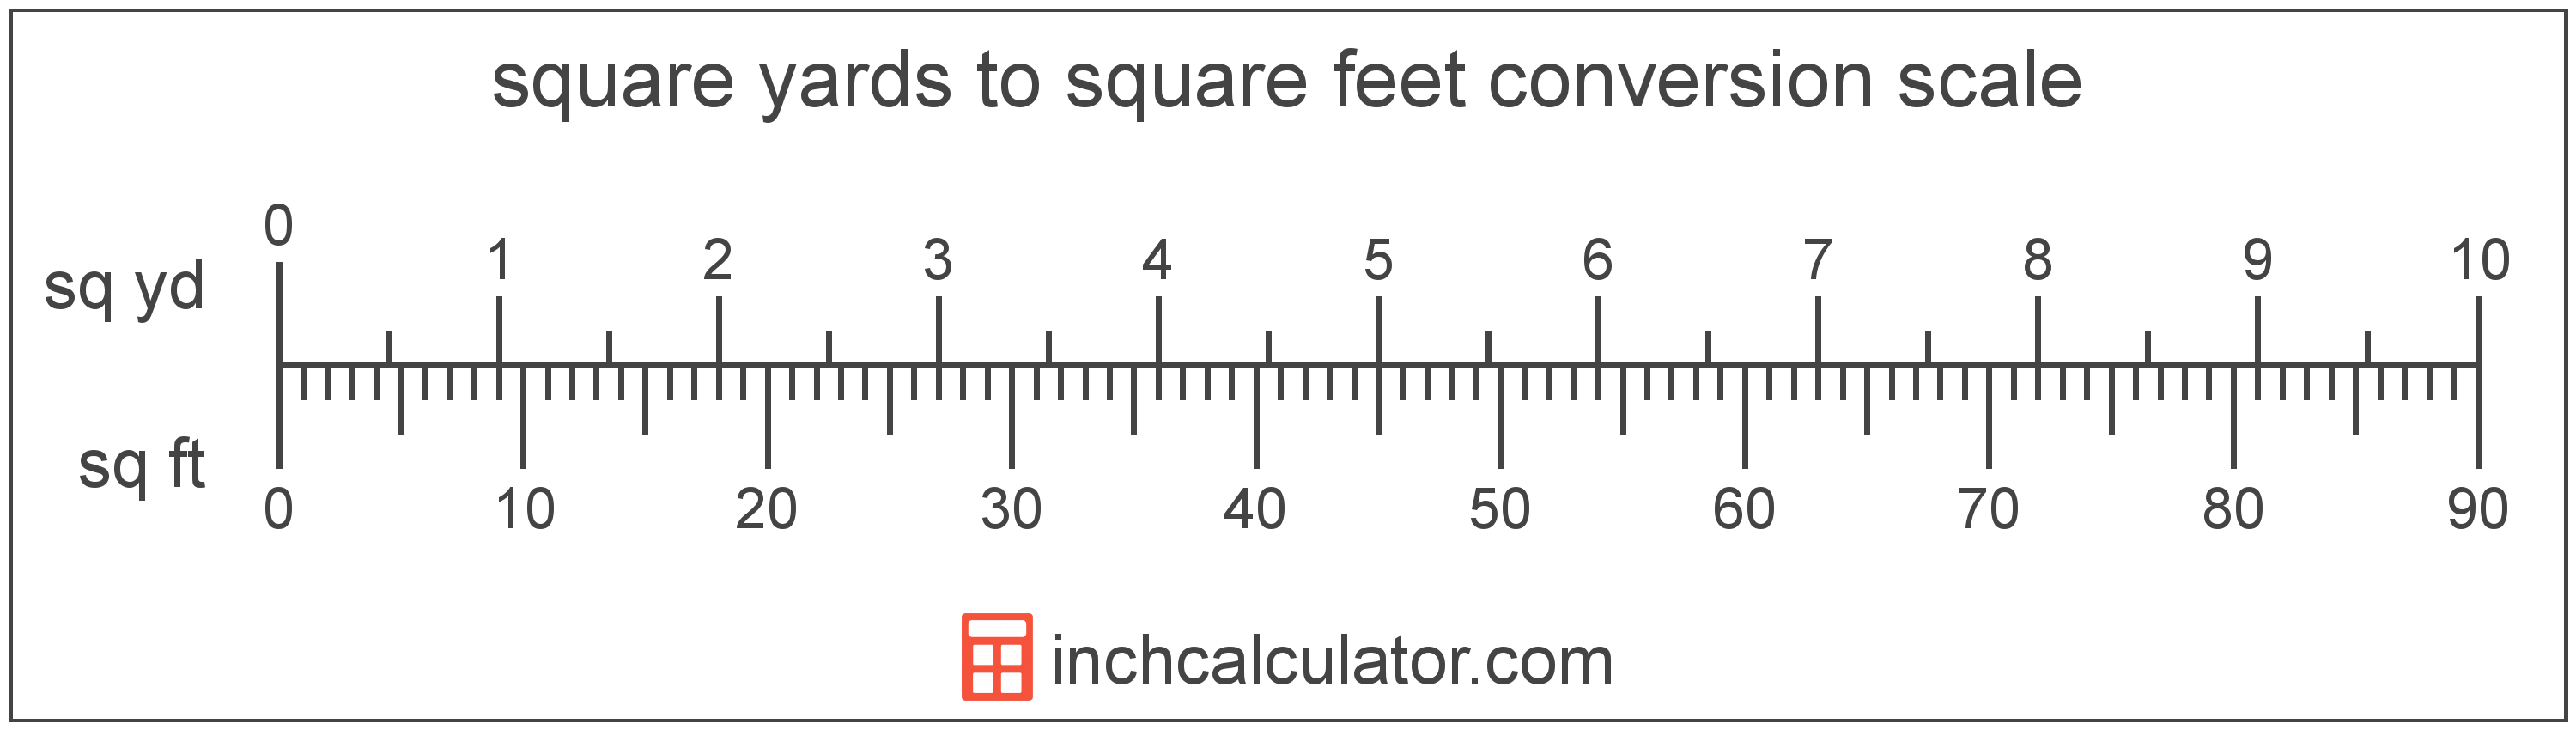 conversion scale showing square yards and equivalent square feet area values